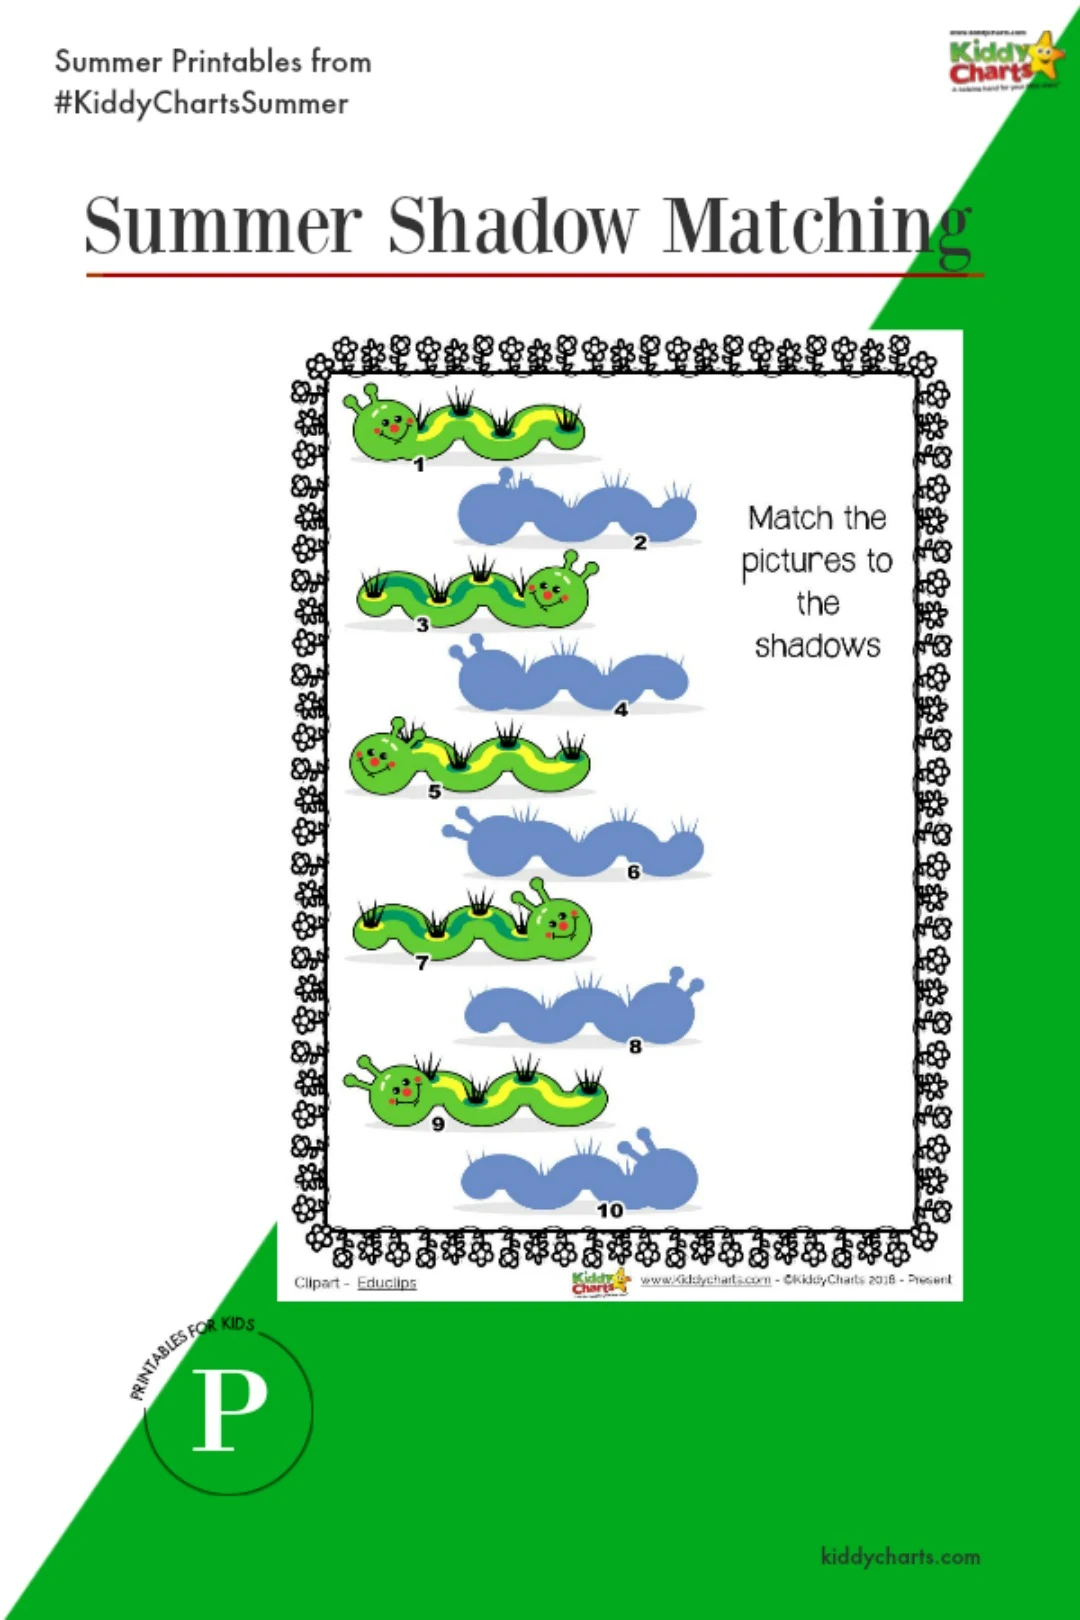 Summer matching game for the kids - can they match the shawdow-y caterpillars? Aren't they cute?!? #summer #printables #kids #maths